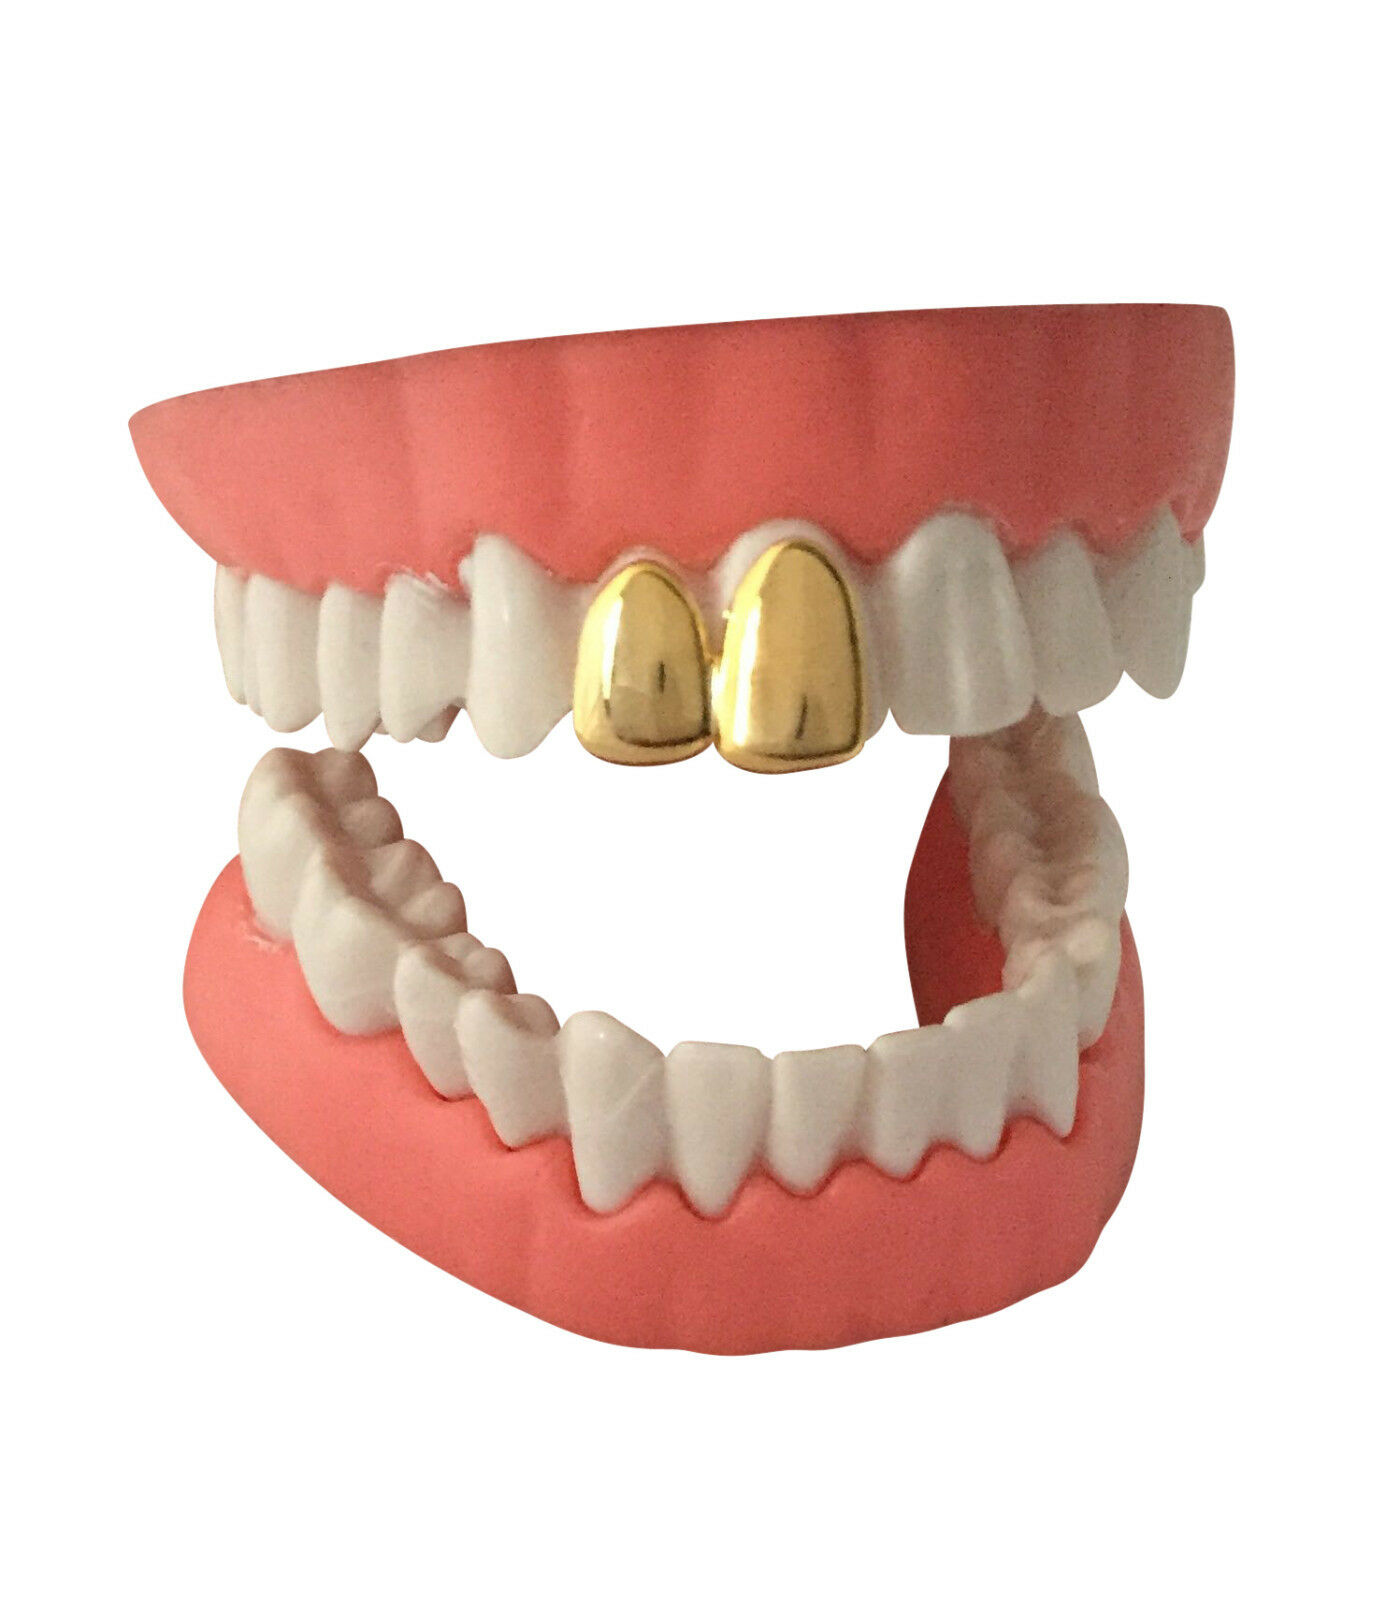 Hip Hop 14k Gold Plated Double Two Tooth Teeth Grillz Grill Canine Cap